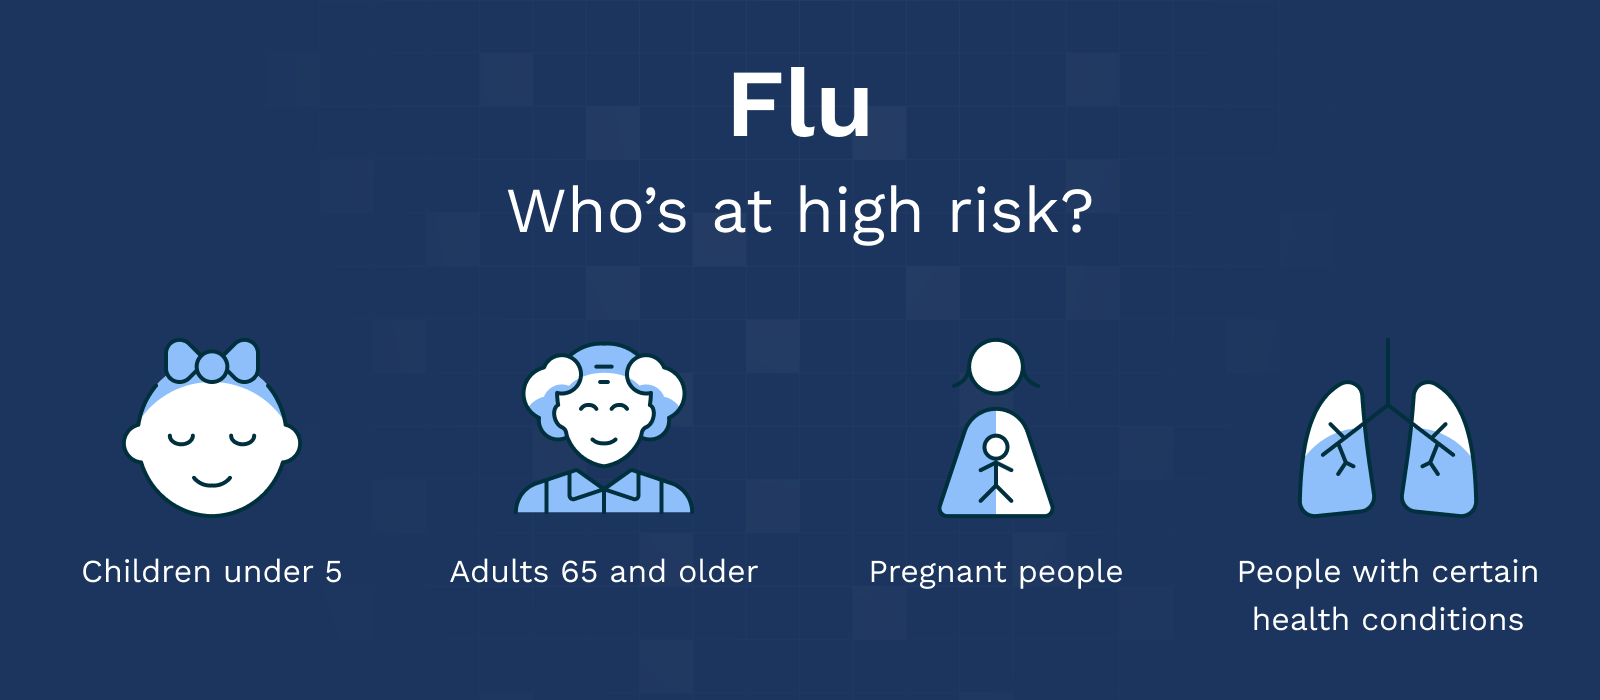 Flu - who's at high risk - children under 5, adults 65 and older, pregnant people, people with certain health conditions